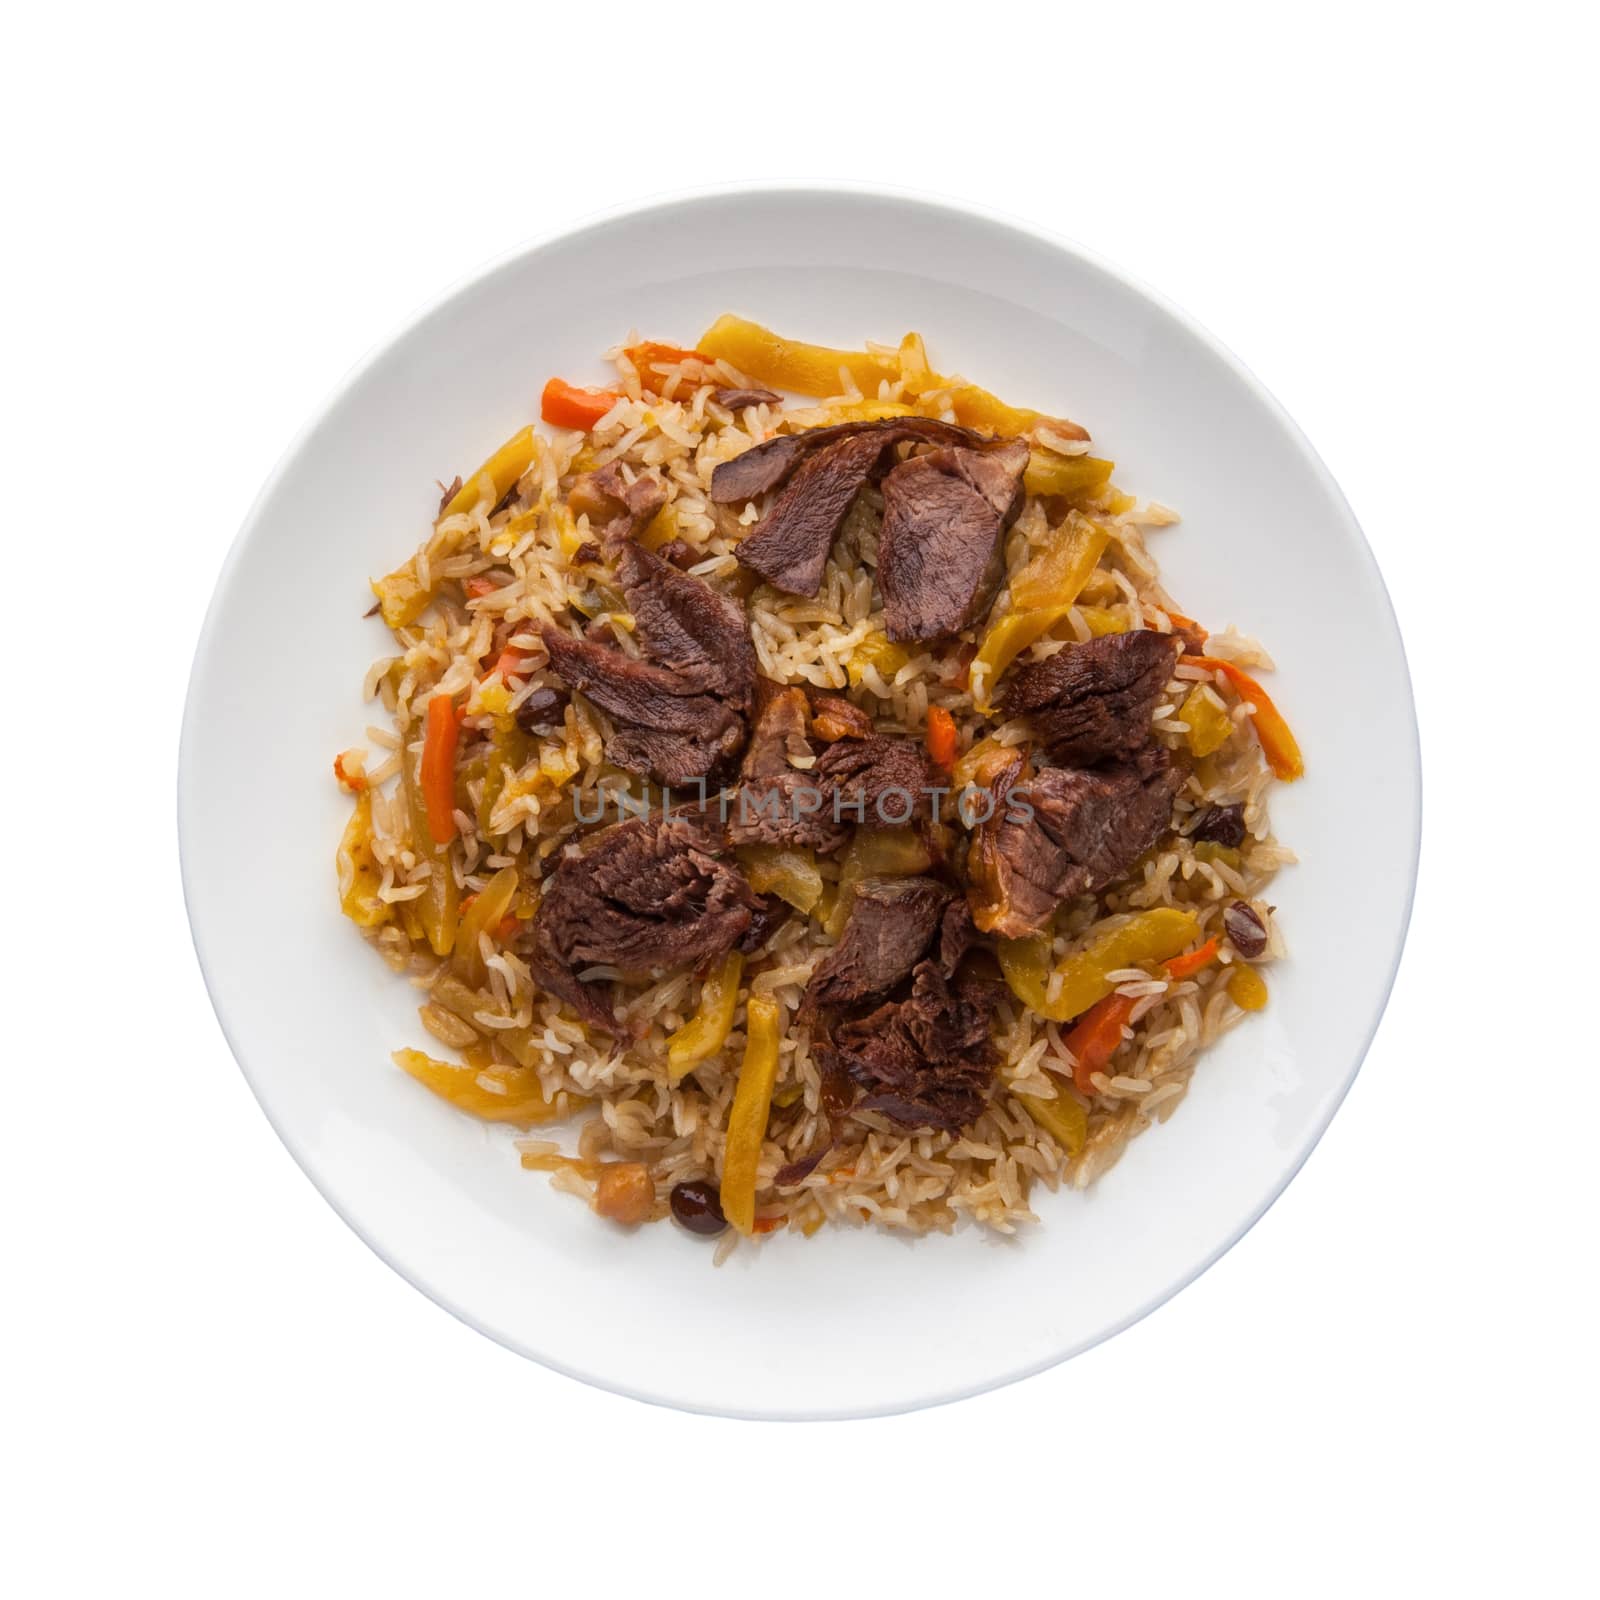 traditional pilaf with meat in a plate on a white background. Top view. Isolated